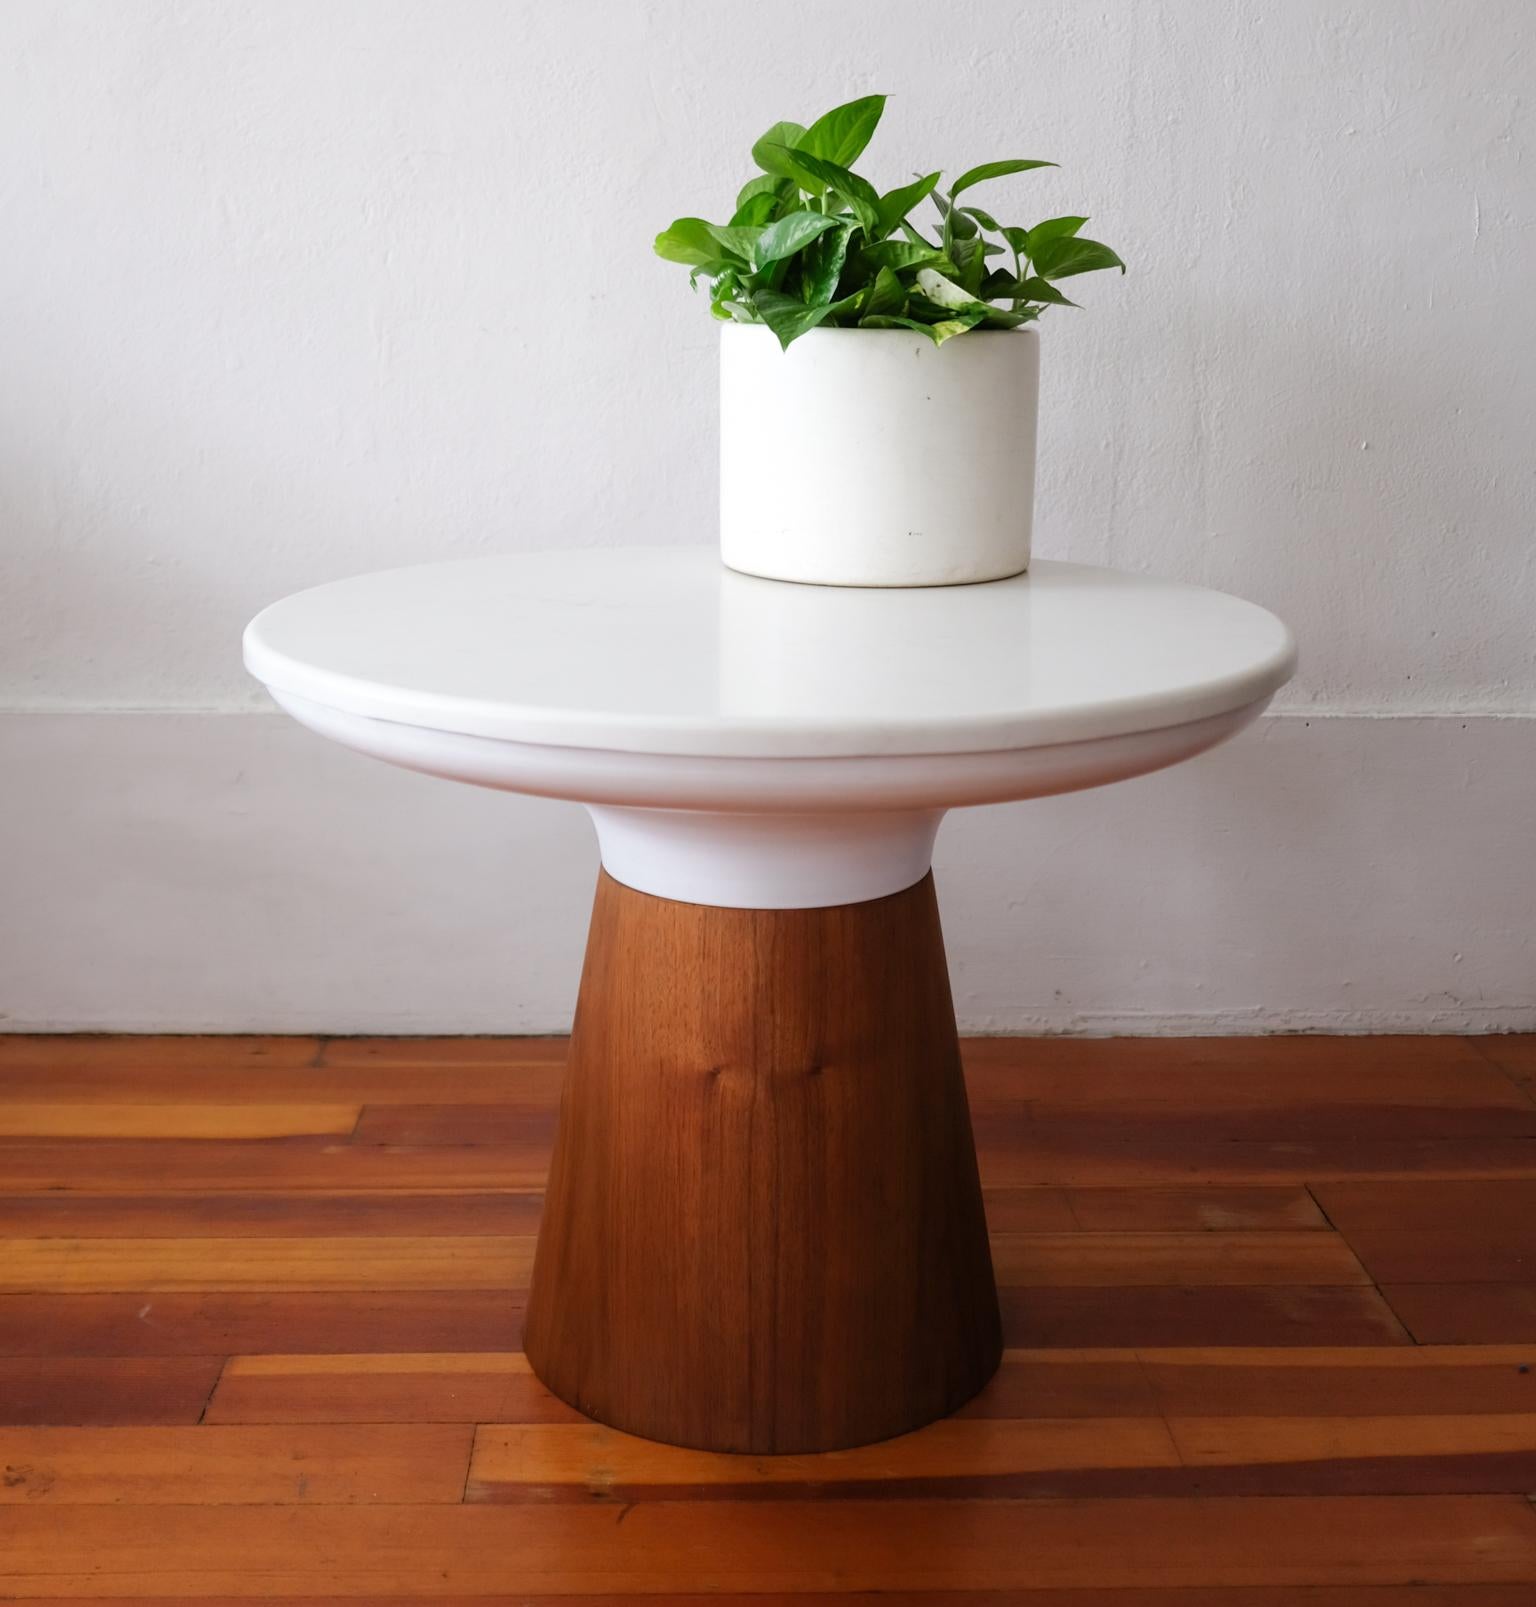 Mid-Century Modern Frank Rohloff Marble Top Table with Pedestal Base, California Design 1960s